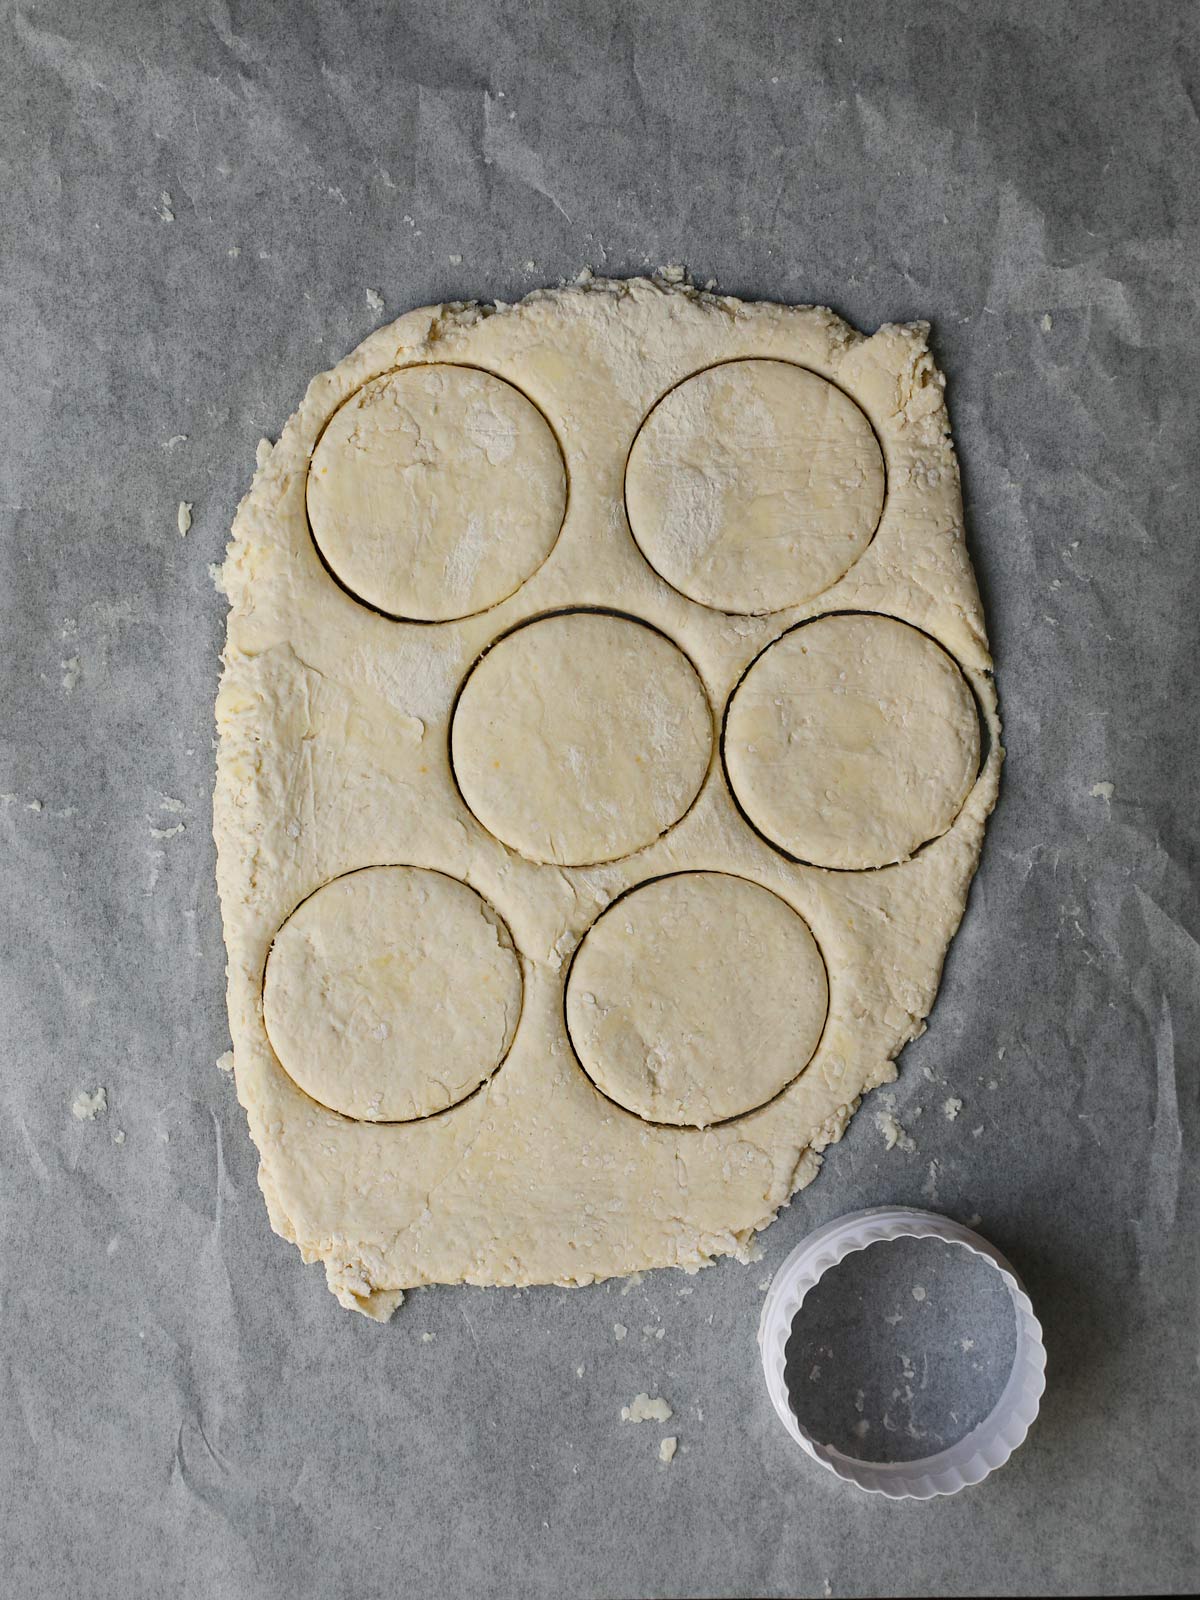 dough rolled and cut into rounds.